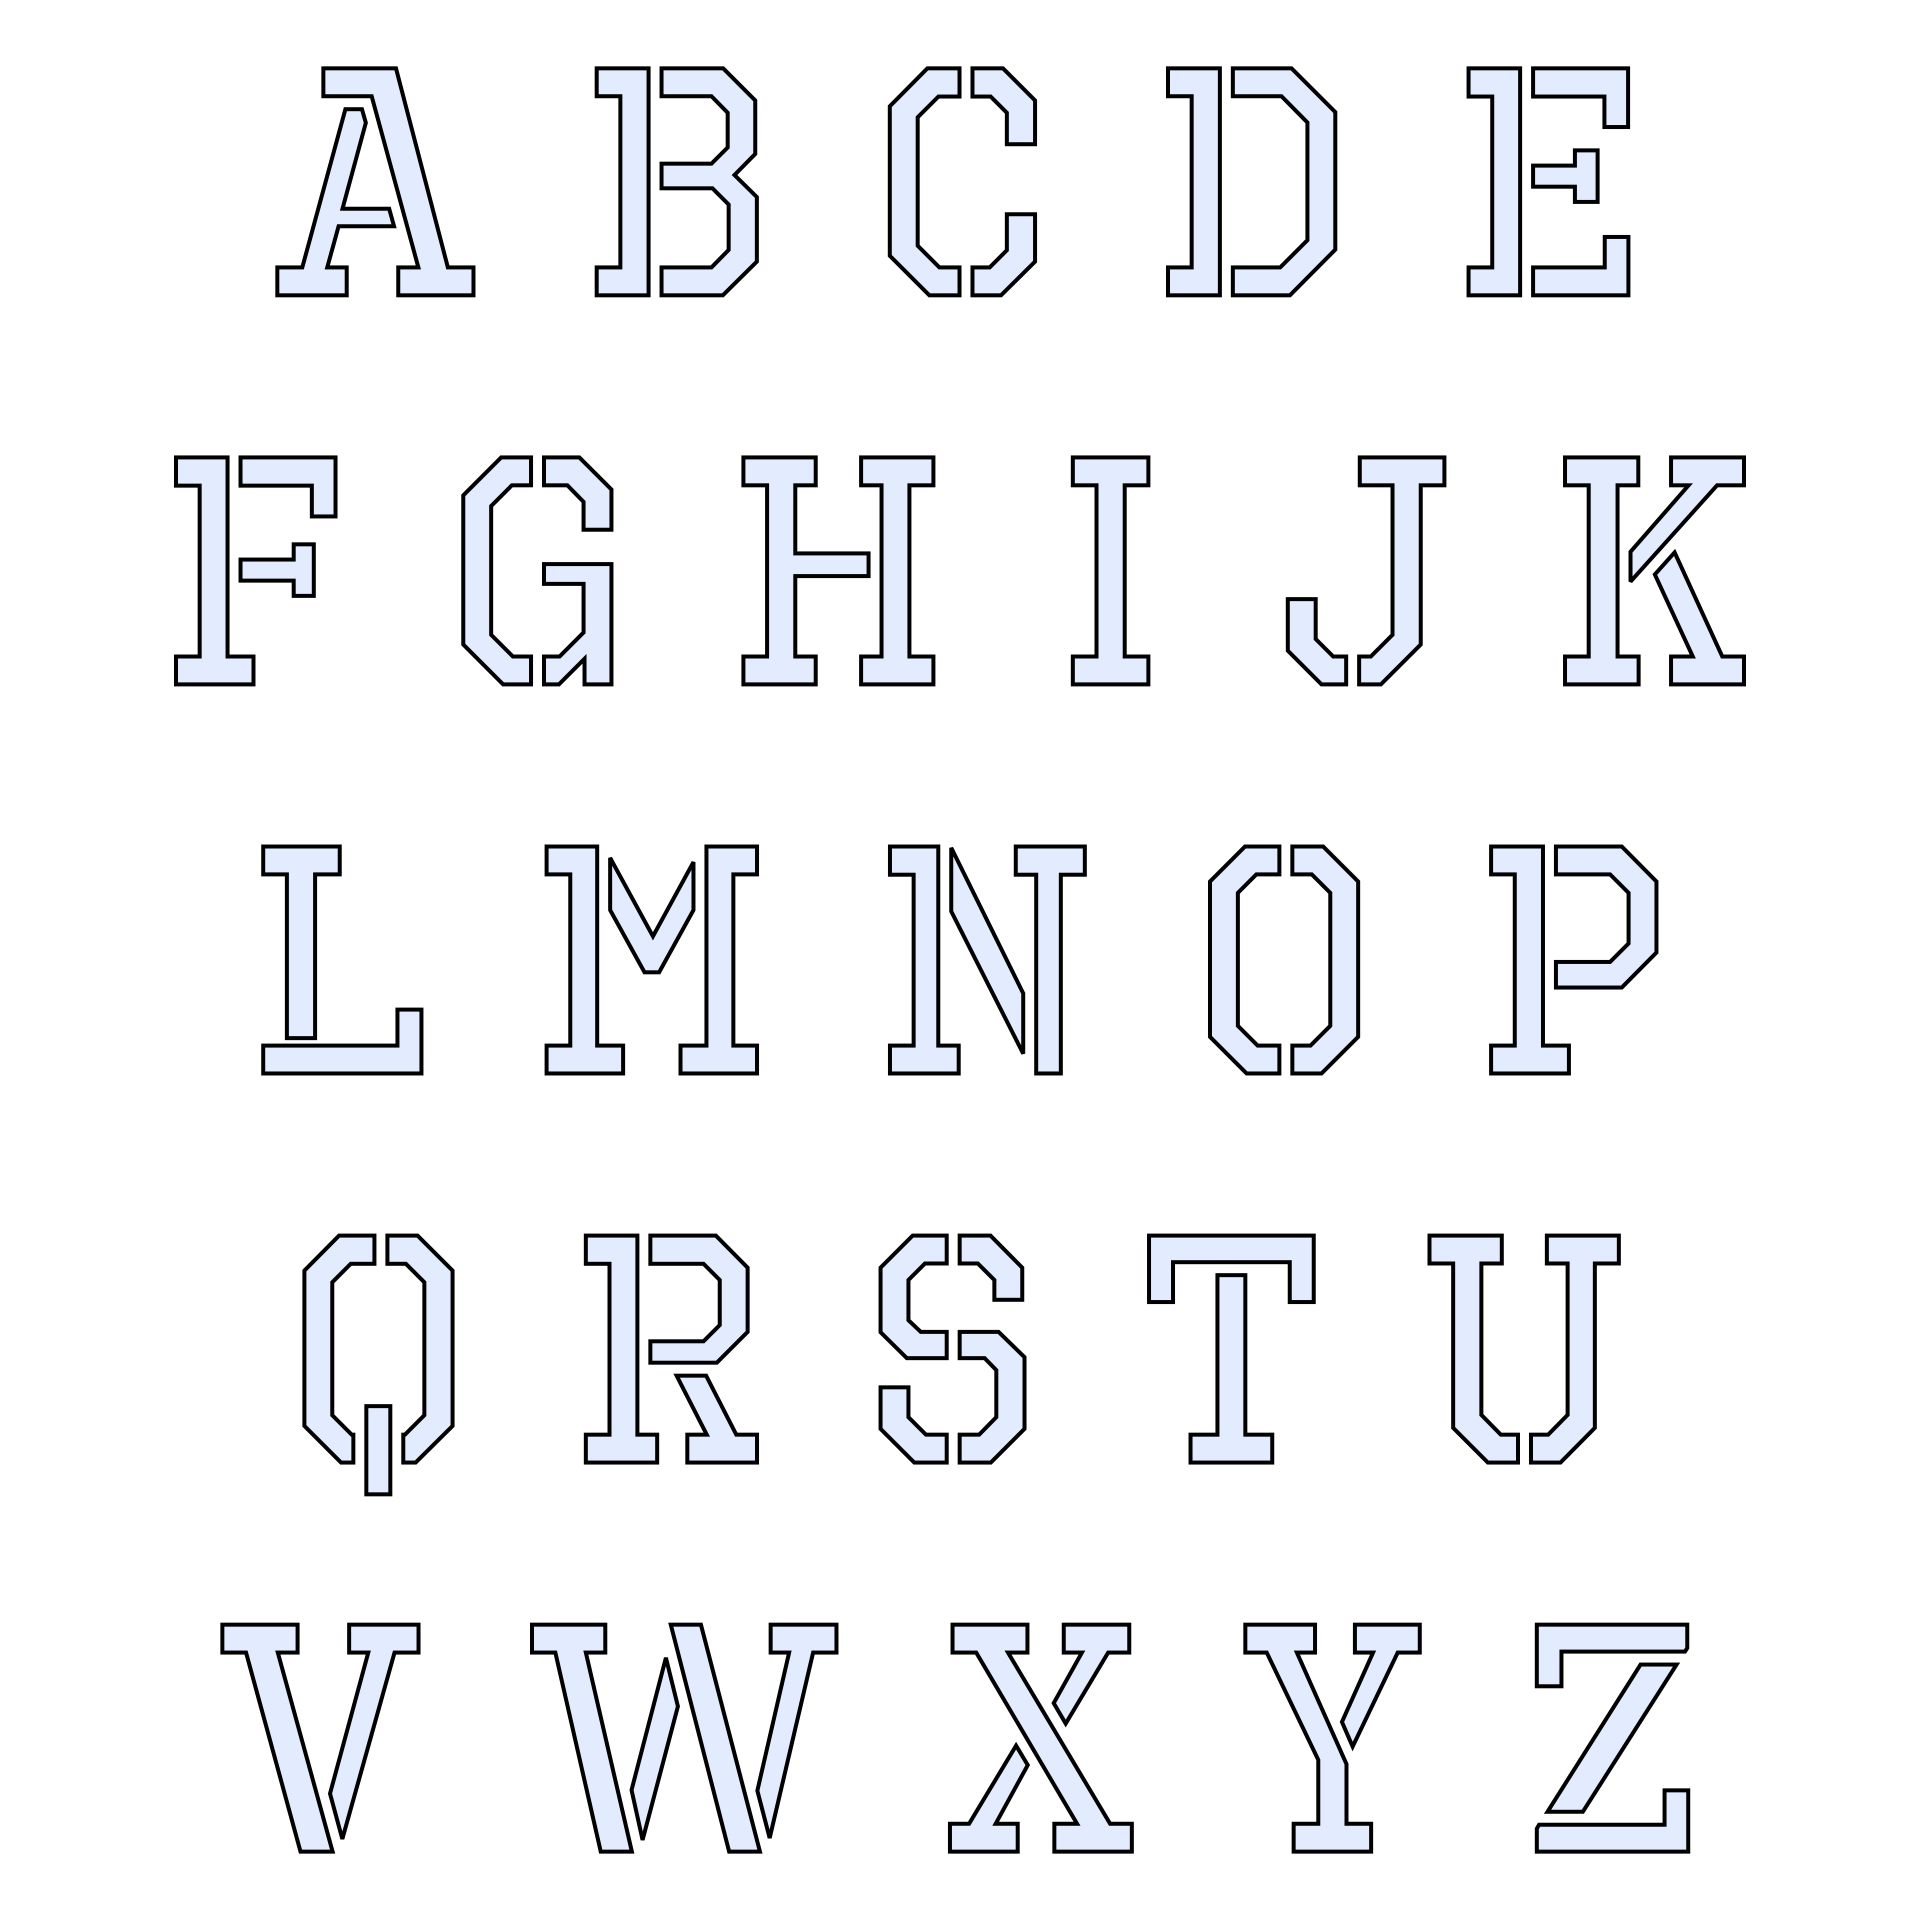 7-best-images-of-free-printable-alphabet-cut-outs-6-best-images-of